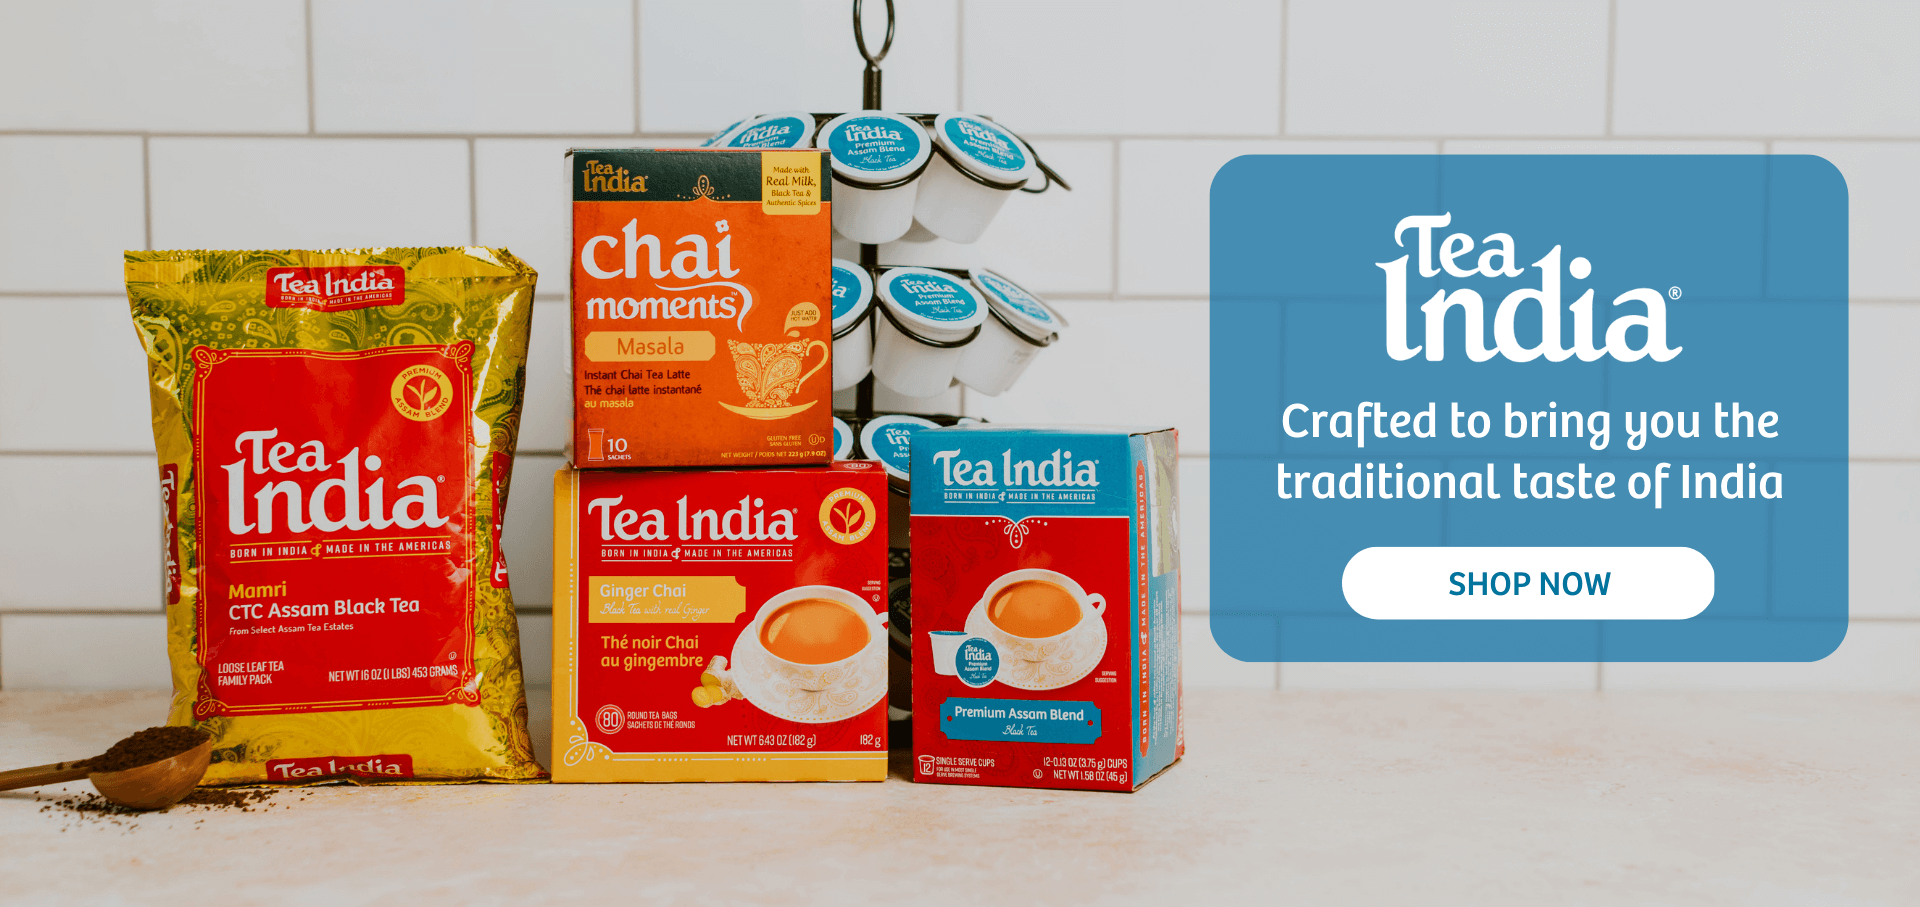 cartons and bag of tea india tea with text that reads tea india crafted to bring you the traditional taste of india shop now